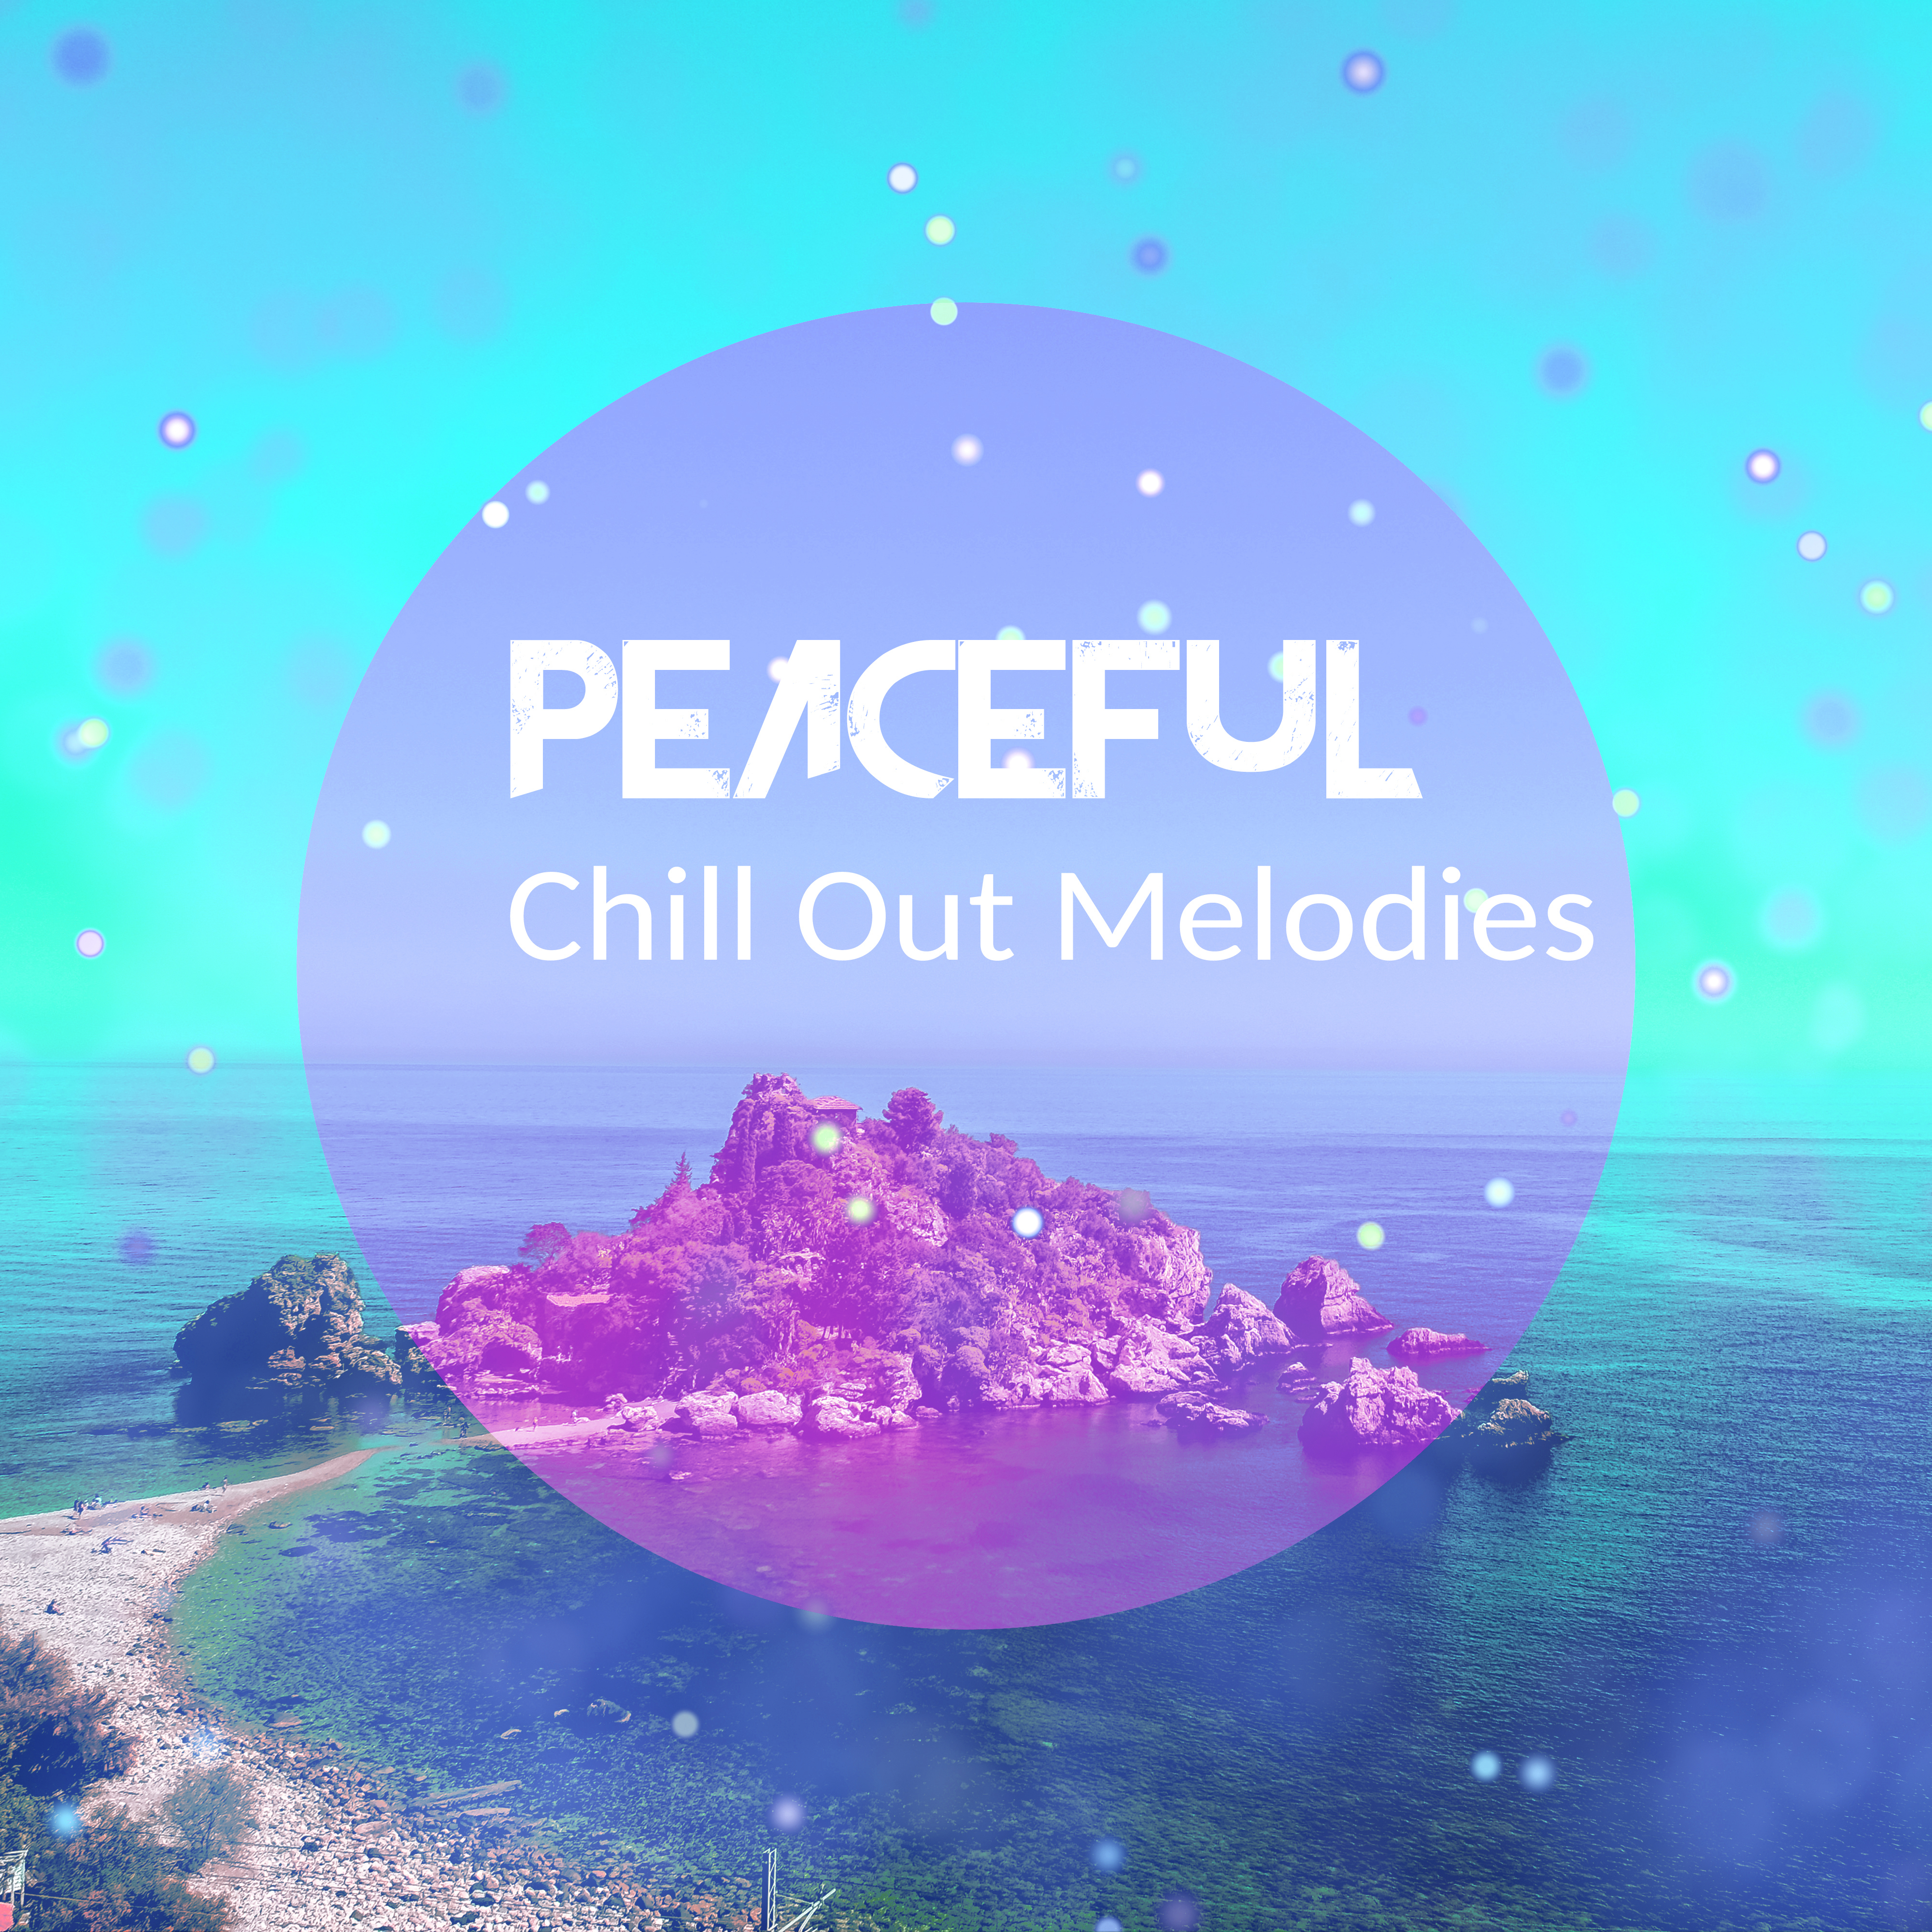 Peaceful Chill Out Melodies – Easy Listening Chill Out Songs, No More Stress, Mind Rest, Summertime Music